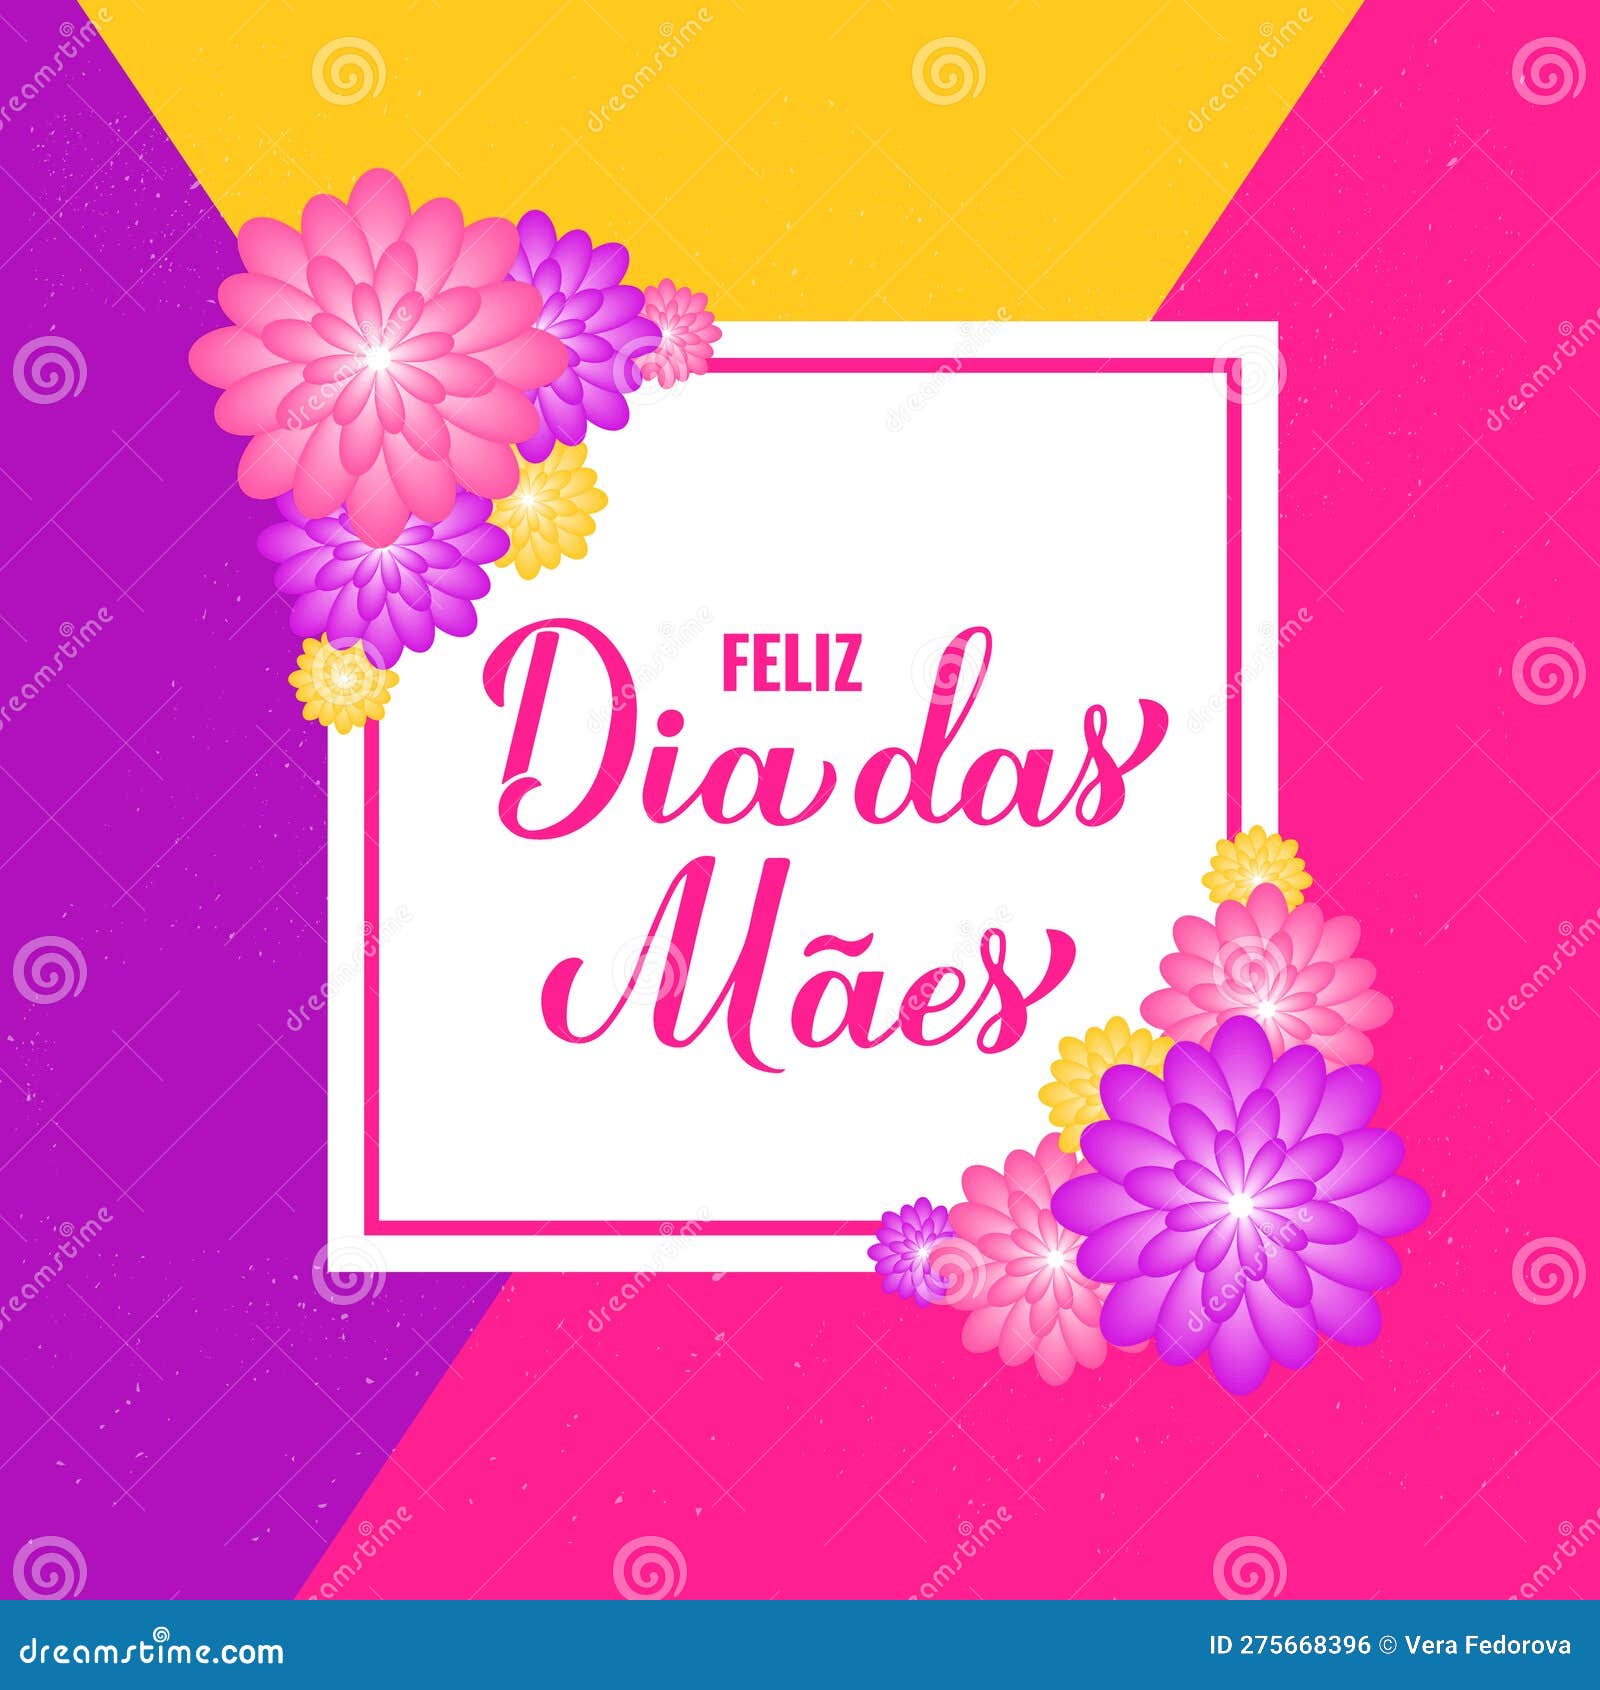 feliz dia das maes. happy mothers day in portuguese. greeting card with spring flowers.  template for typography